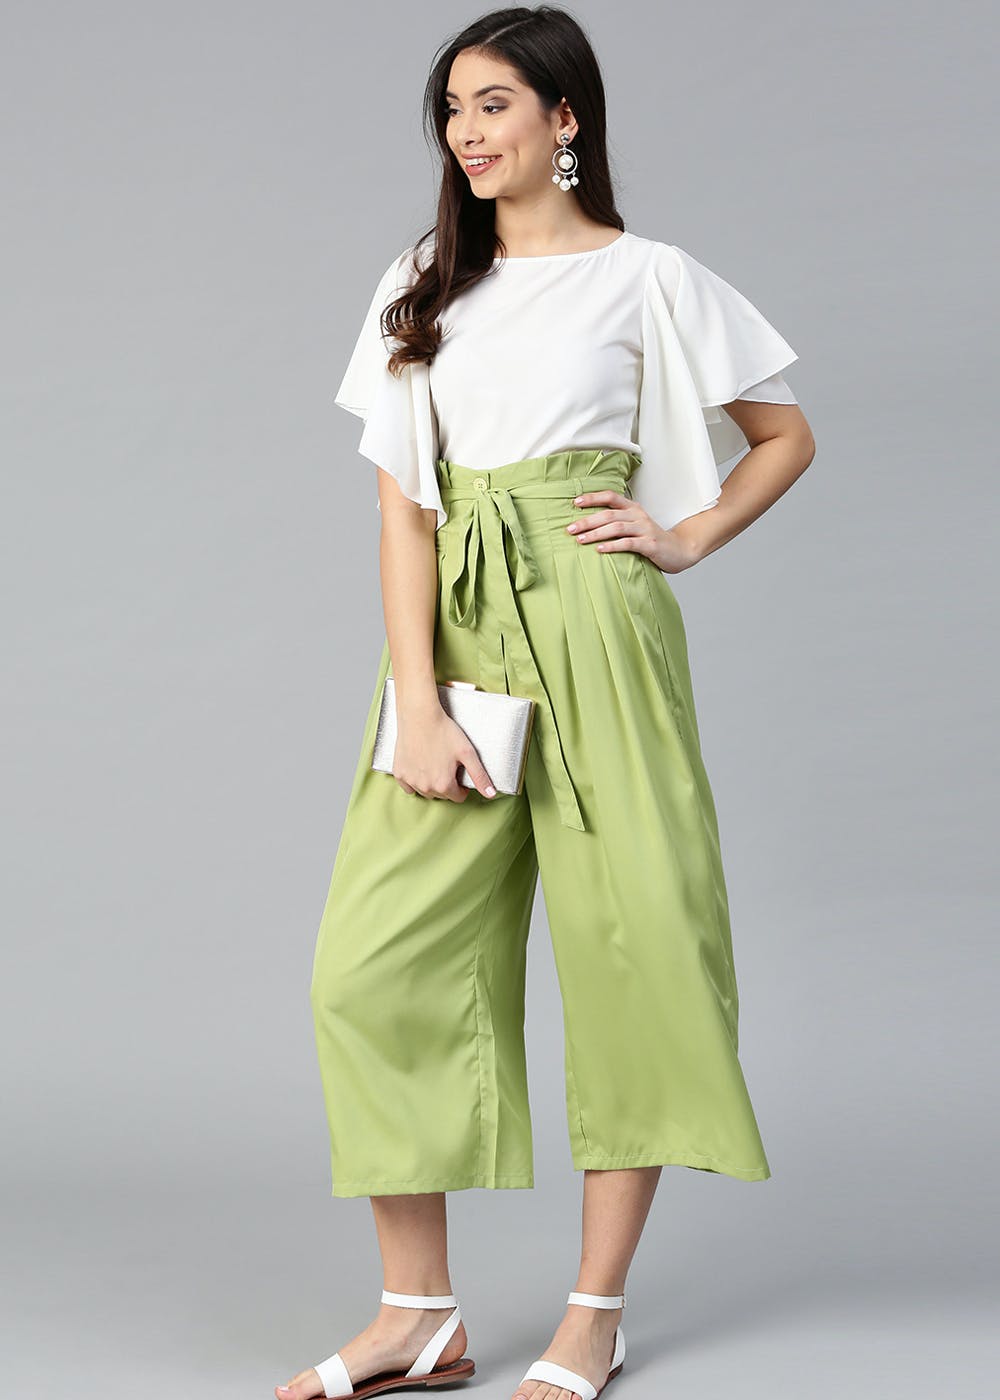 Style Pantry  One Shoulder Ruffle Top  High Waist Wide Leg Pants  Chic  tops blouses Dressy outfits One shoulder ruffle top